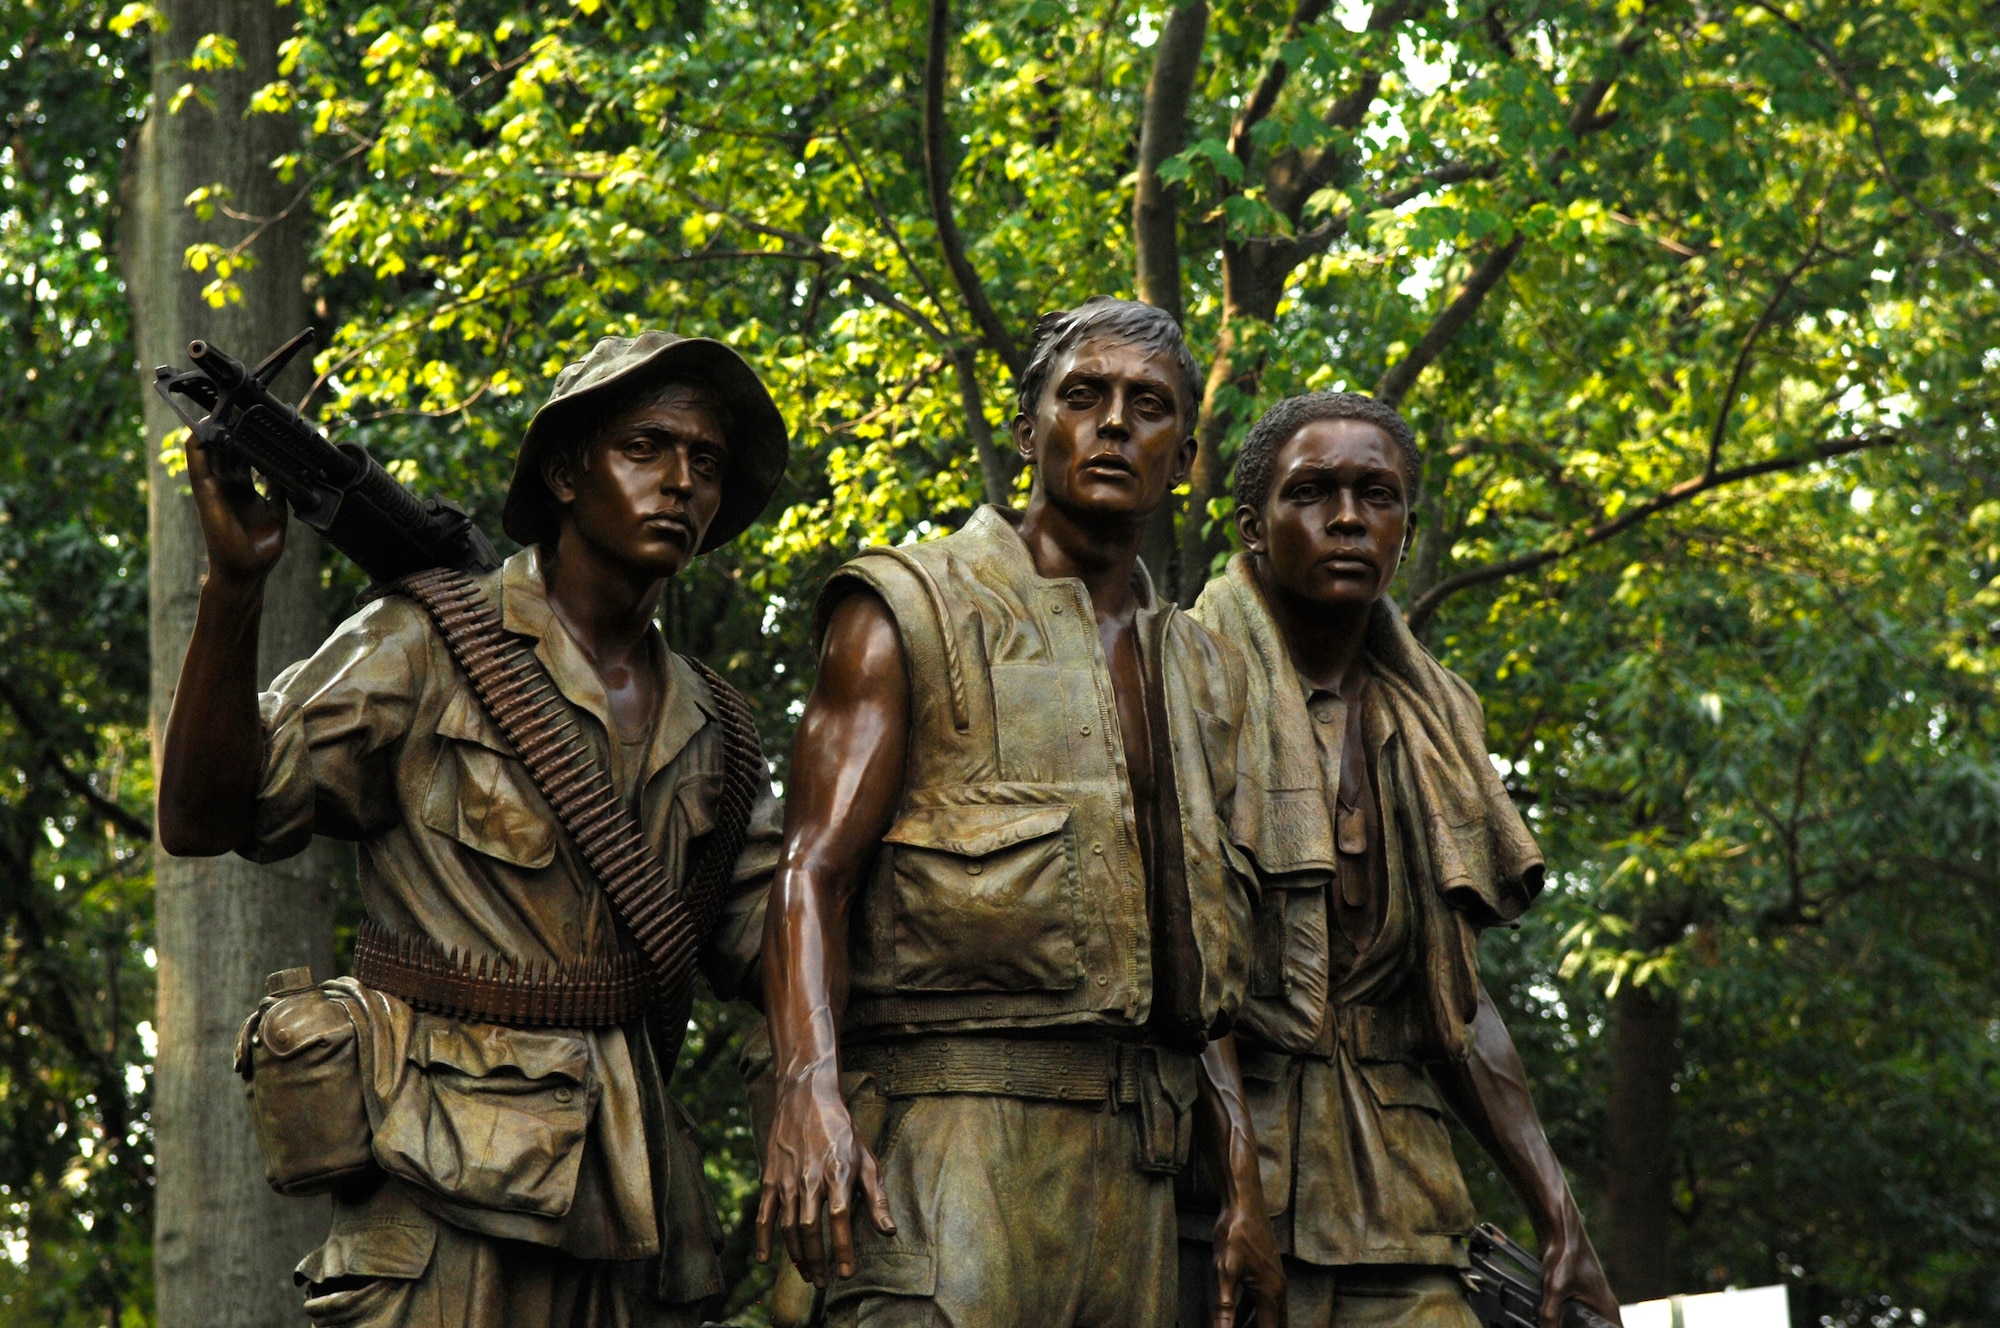 After six weeks of restoration work, the newly restored Three Servicemen Statue was unveiled July 8, 2010, during a rededication ceremony near the Vietnam Veterans War Memorial in Washington, D.C.  (Defense Department photo/Army Sgt. 1st Class Michael J. Carden)